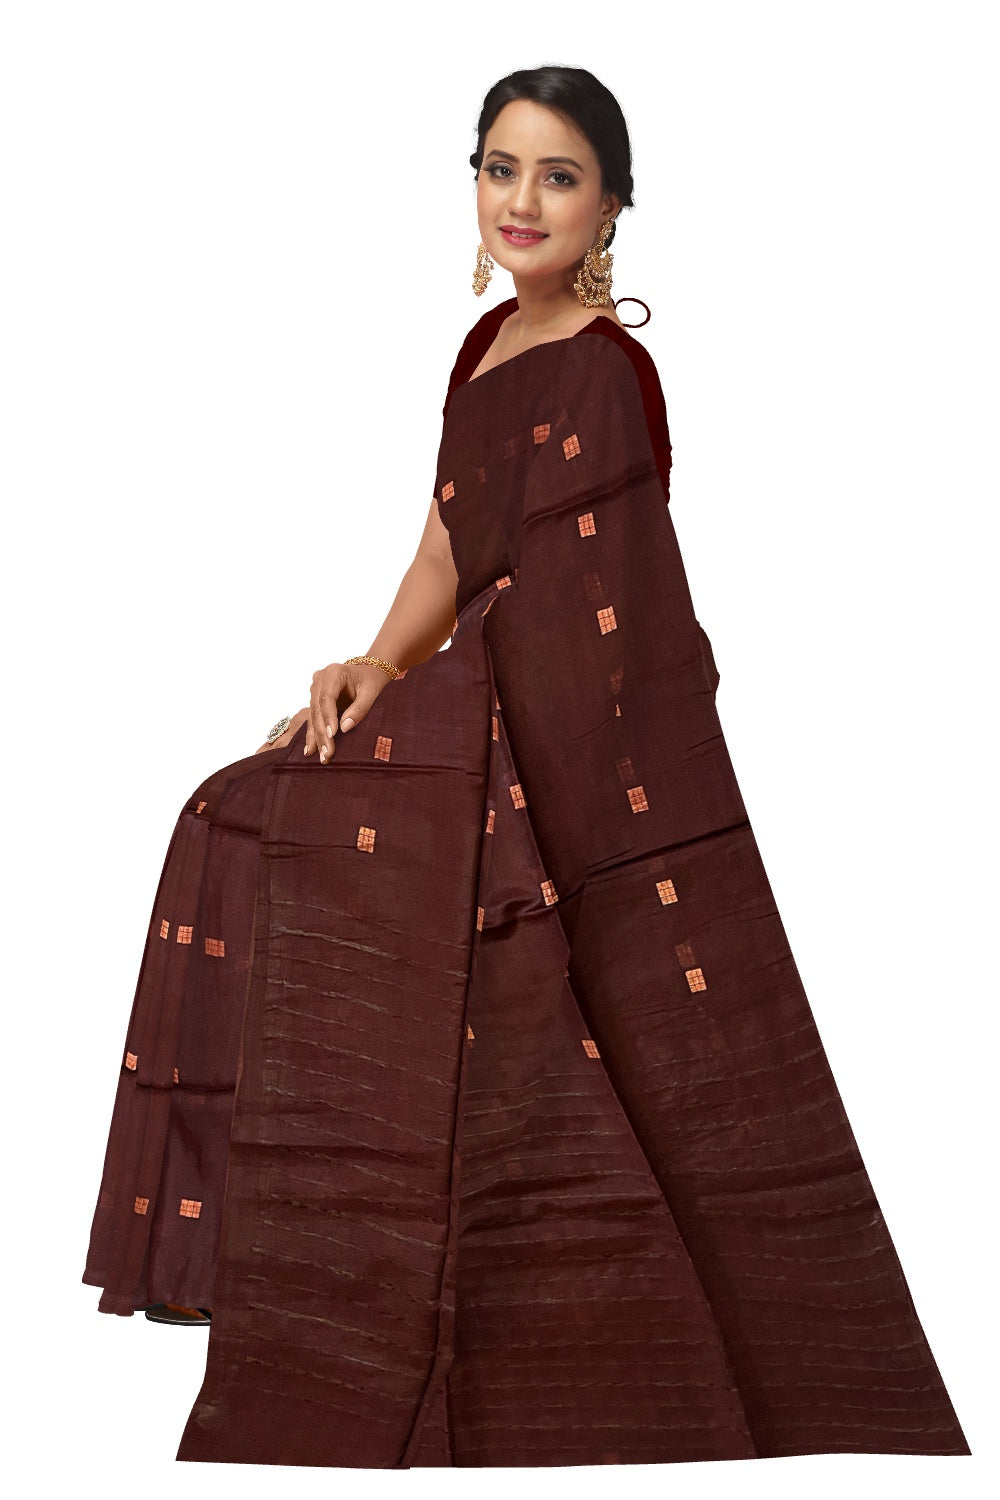 Southloom Cotton Dark Brown Saree with Copper Butta Works on Body